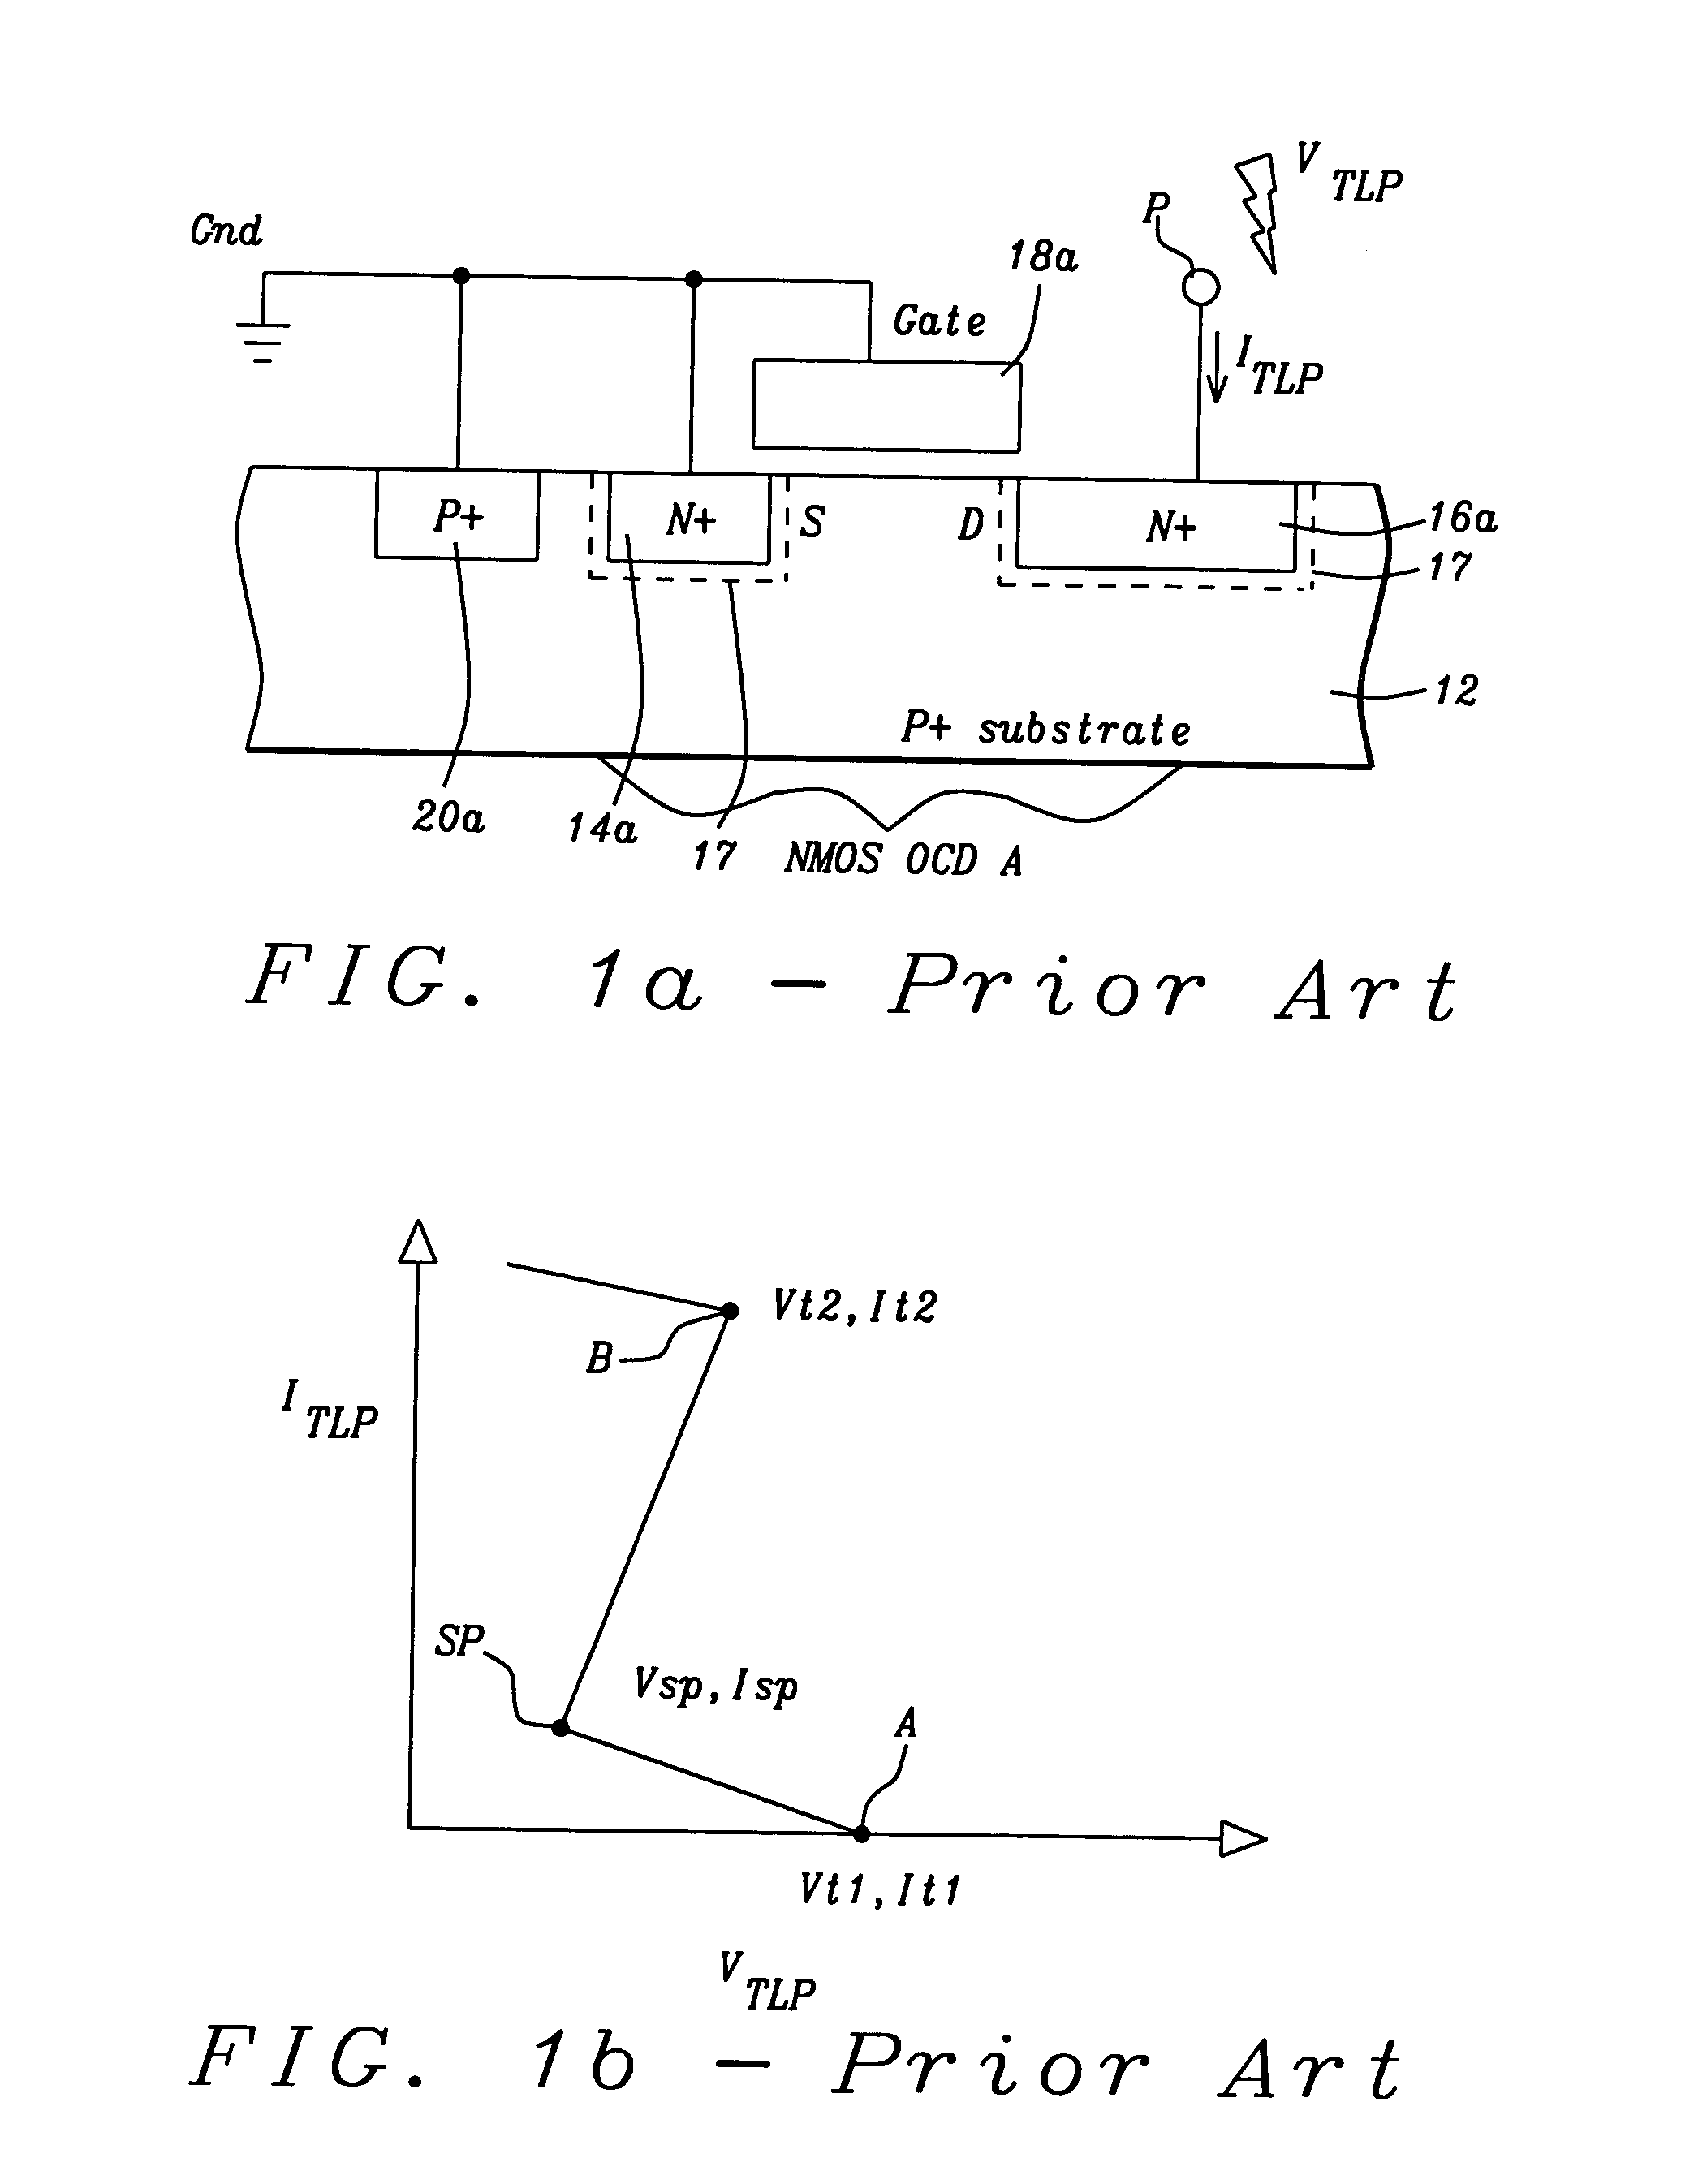 Electrostatic discharge protection device with complementary dual drain implant